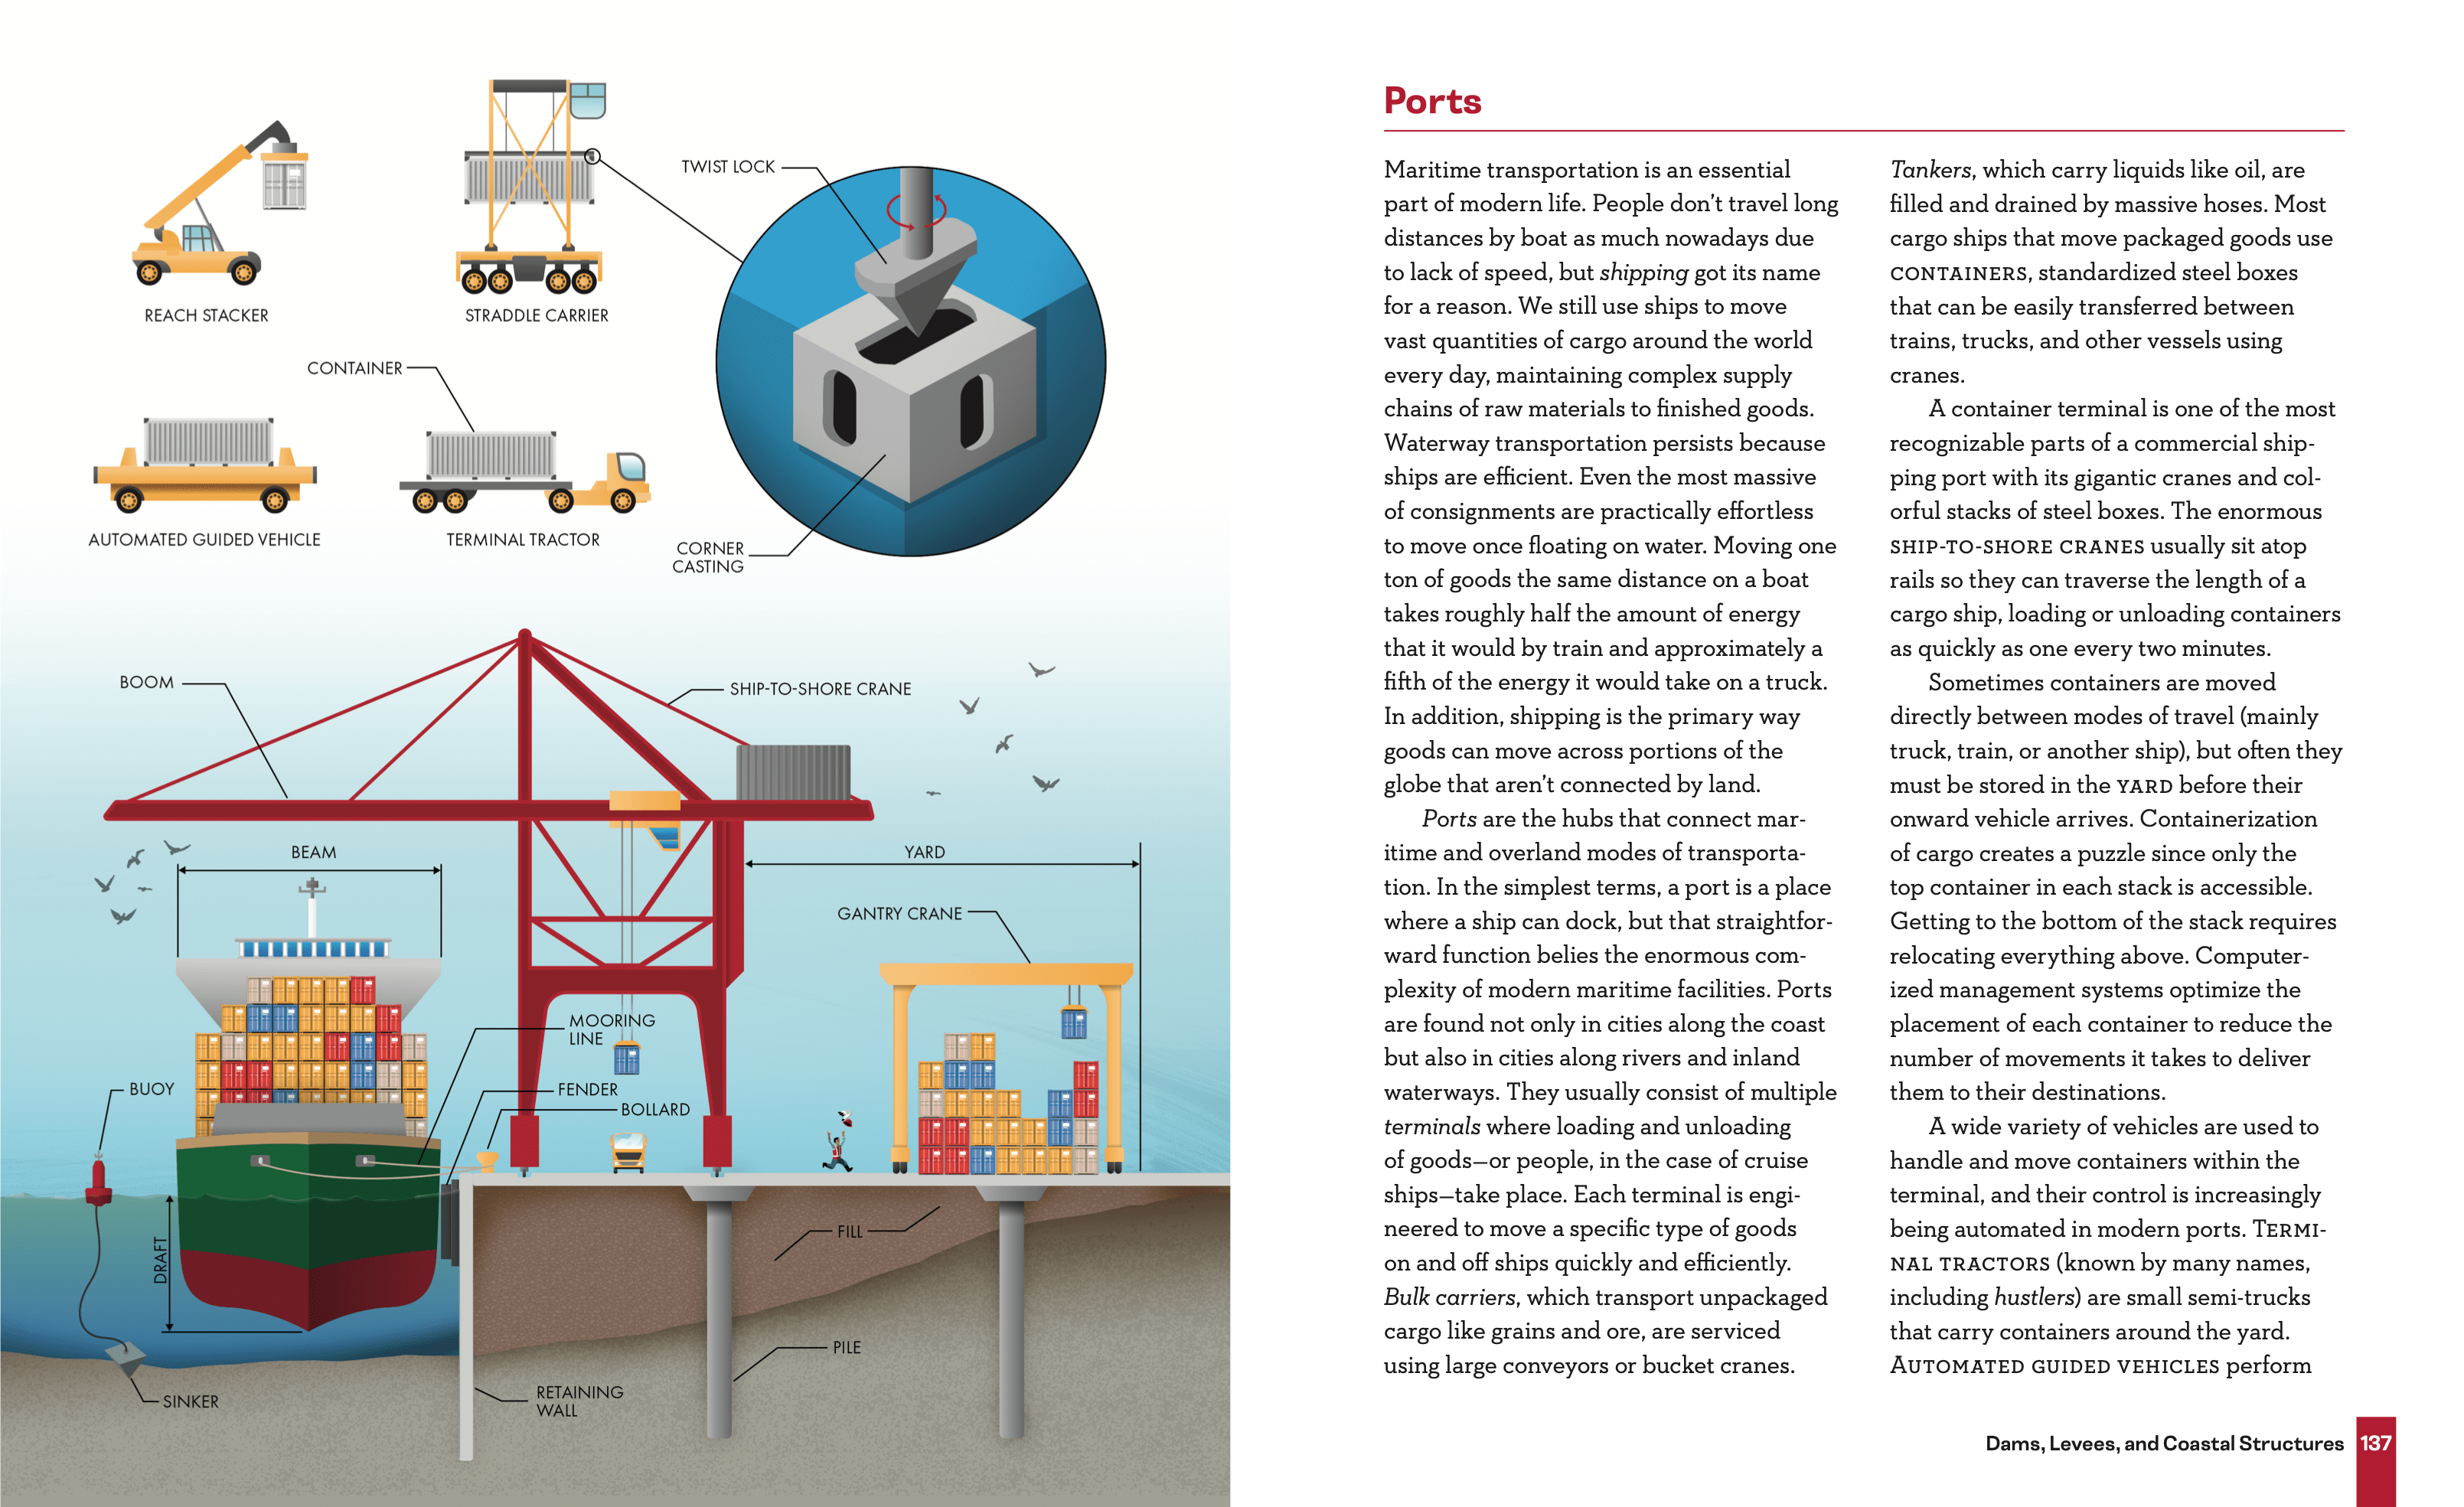 Engineering In Plain Sight pages 136-137